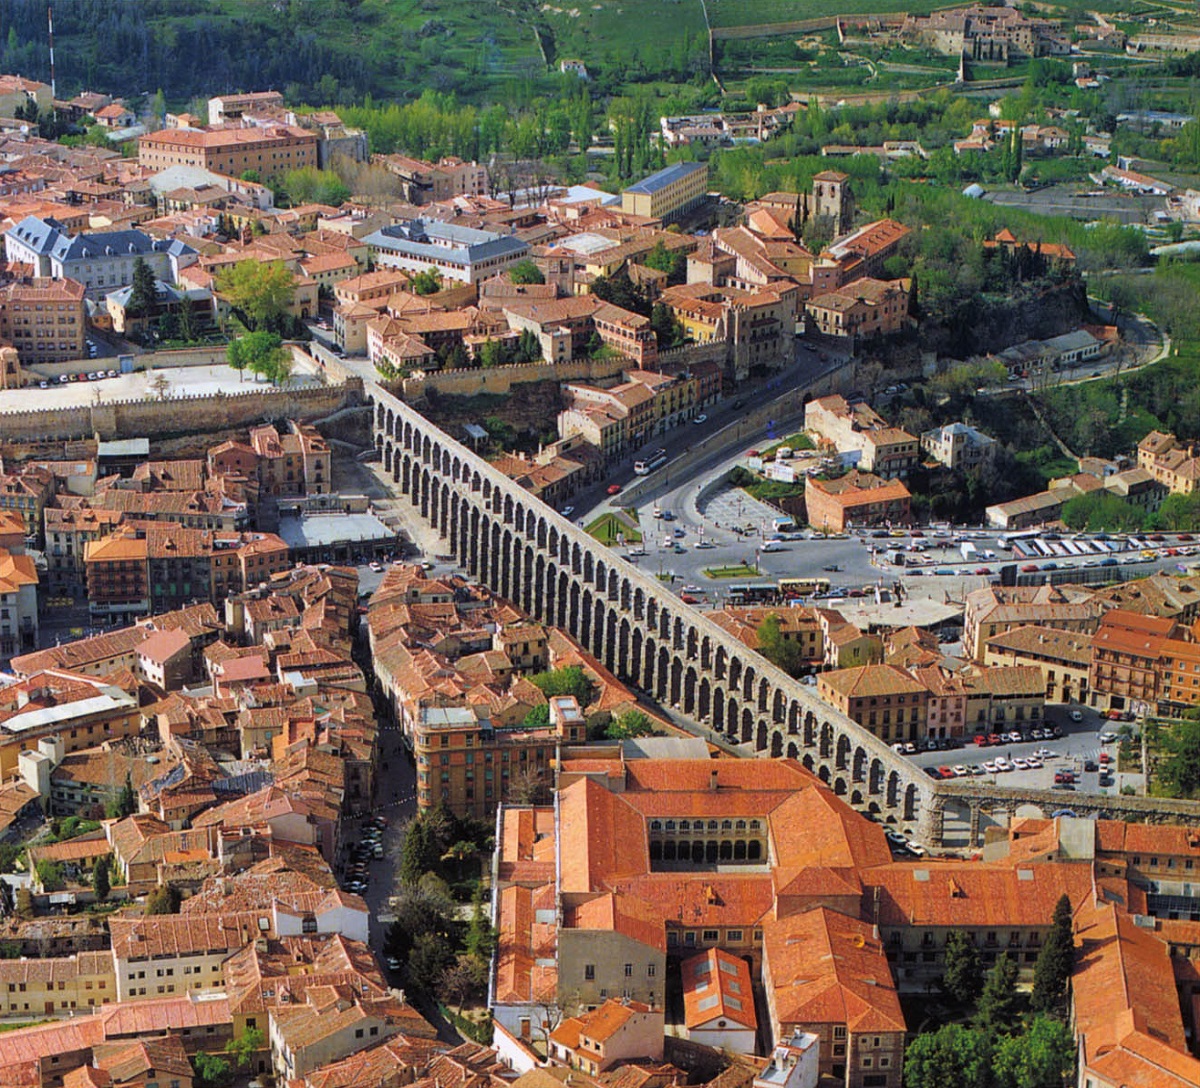 The Ancient Roman Aqueduct In Segovia, Spain - Standing Since The 1st Century